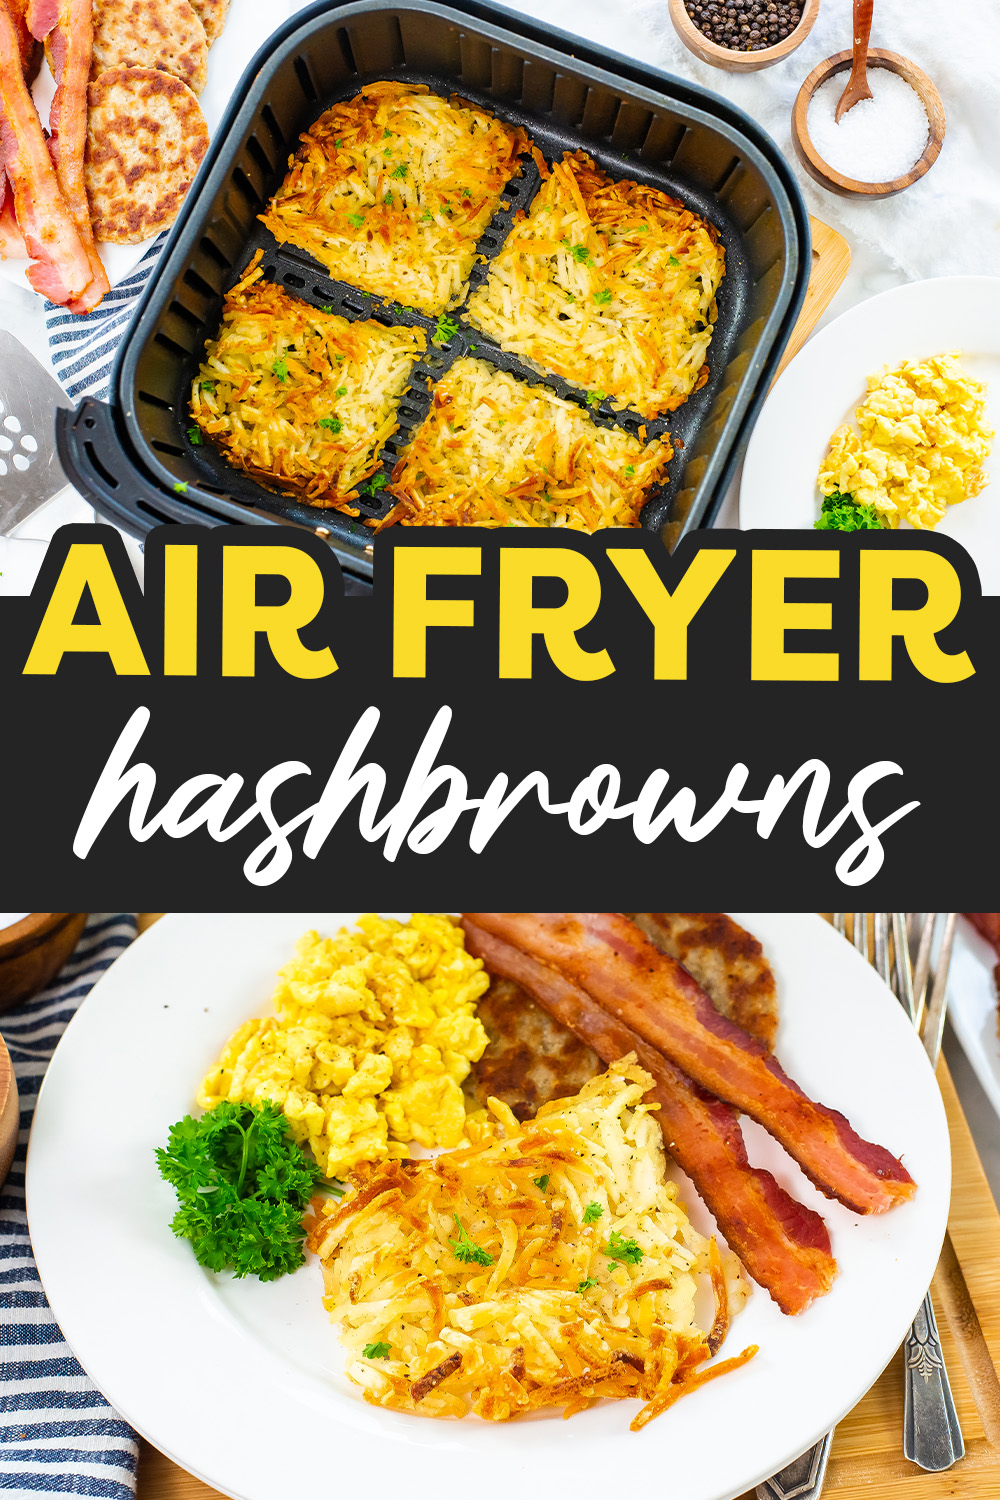 Making frozen hash browns in the air fryer is so easy! We start with shredded frozen hashbrowns, toss them in a little oil and seasoning, and pile them in the air fryer! They turn out perfectly crisp around the edges and ready for breakfast in minutes!  